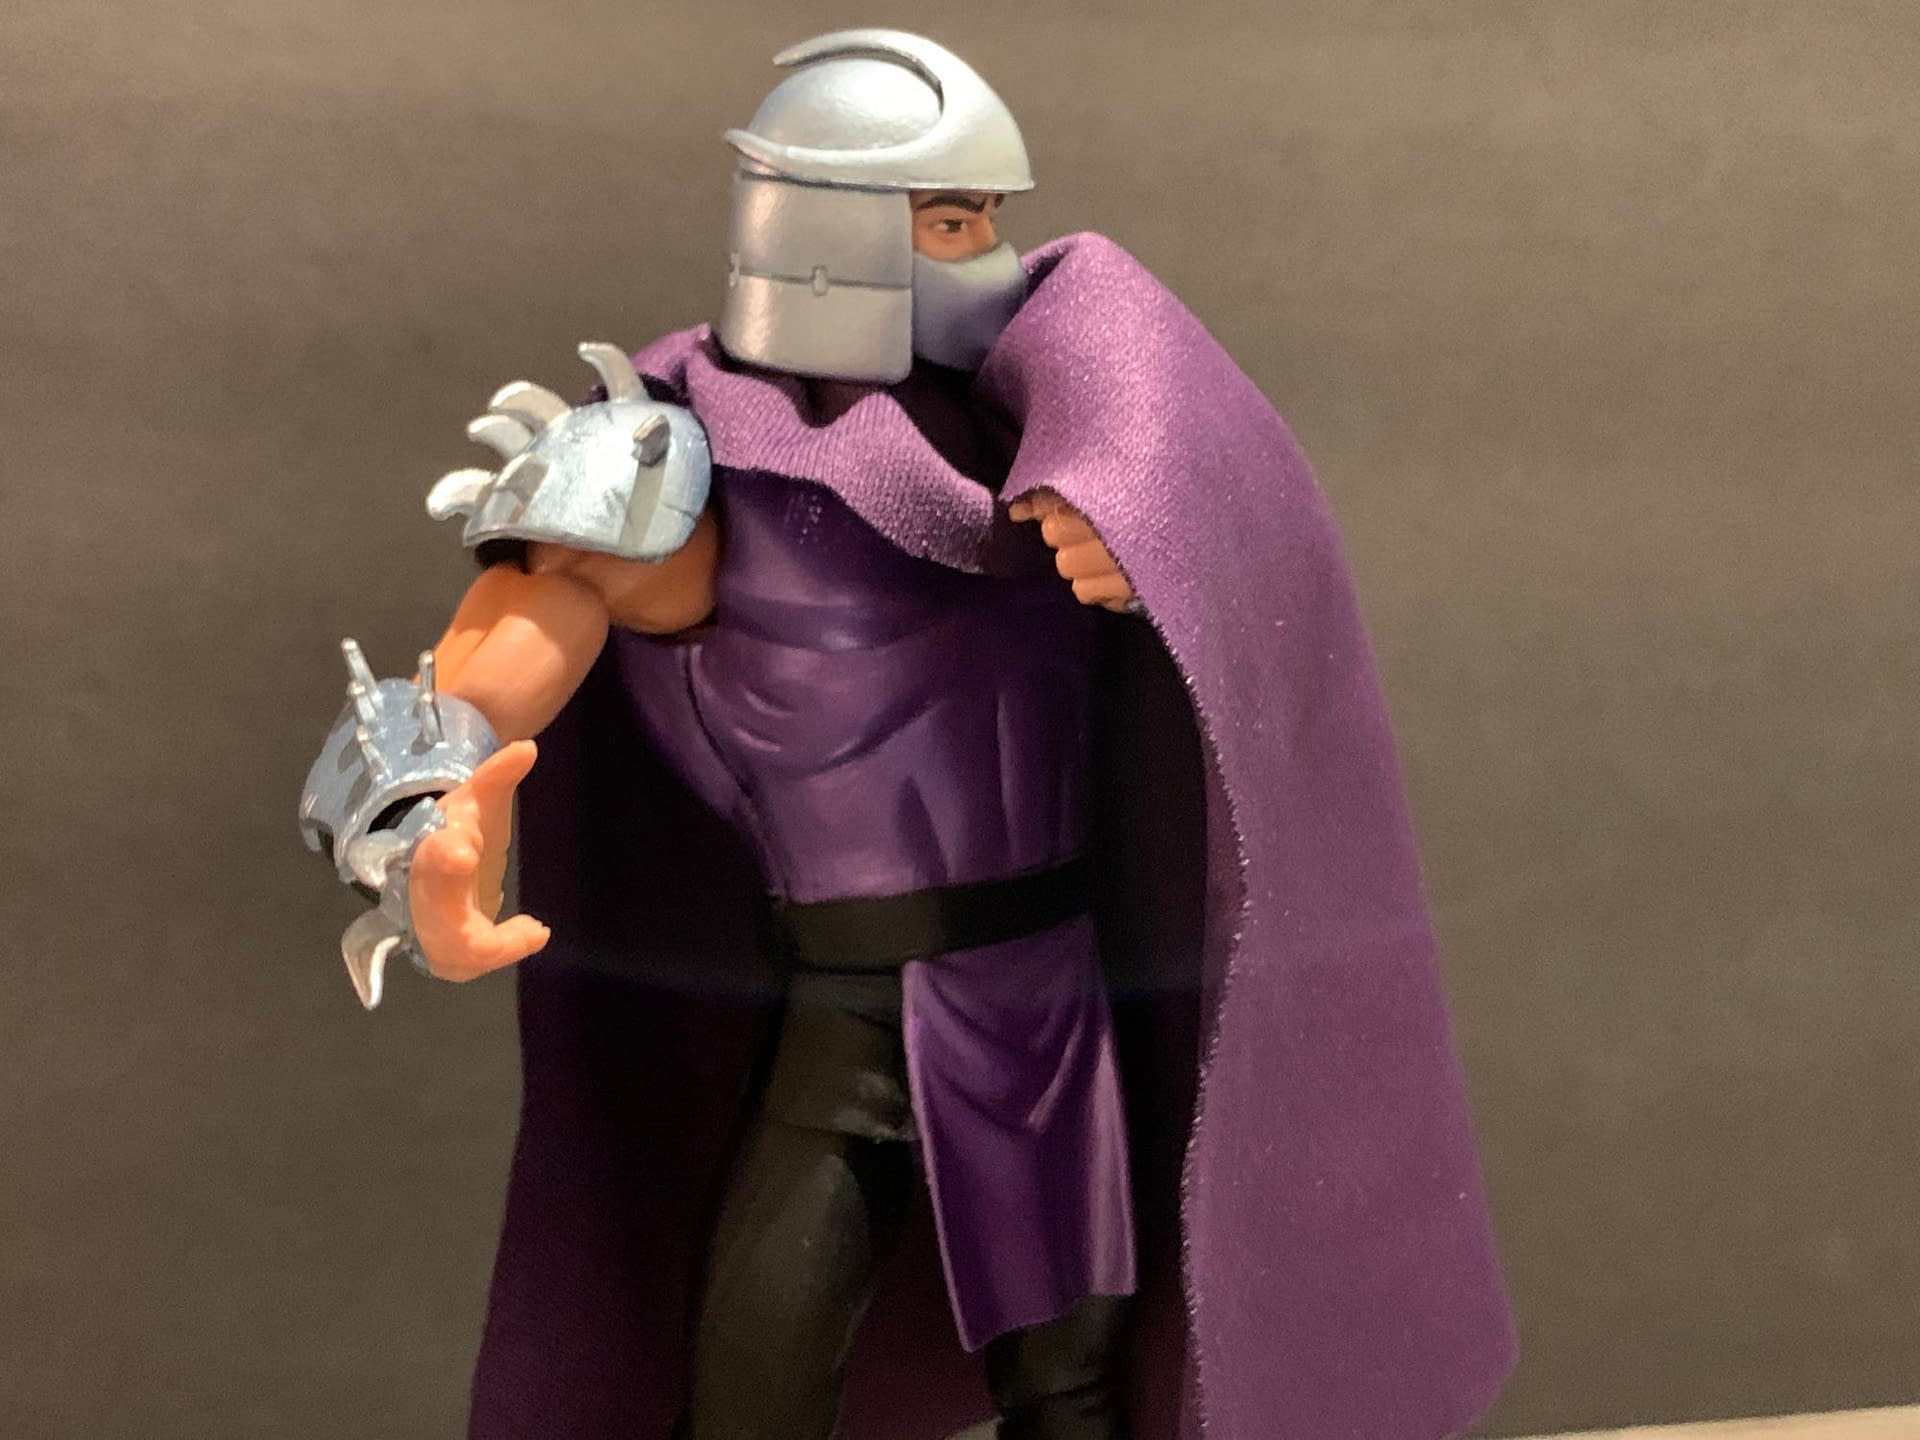 TMNT NECA Overload: We Look At Three Awesome New Figures